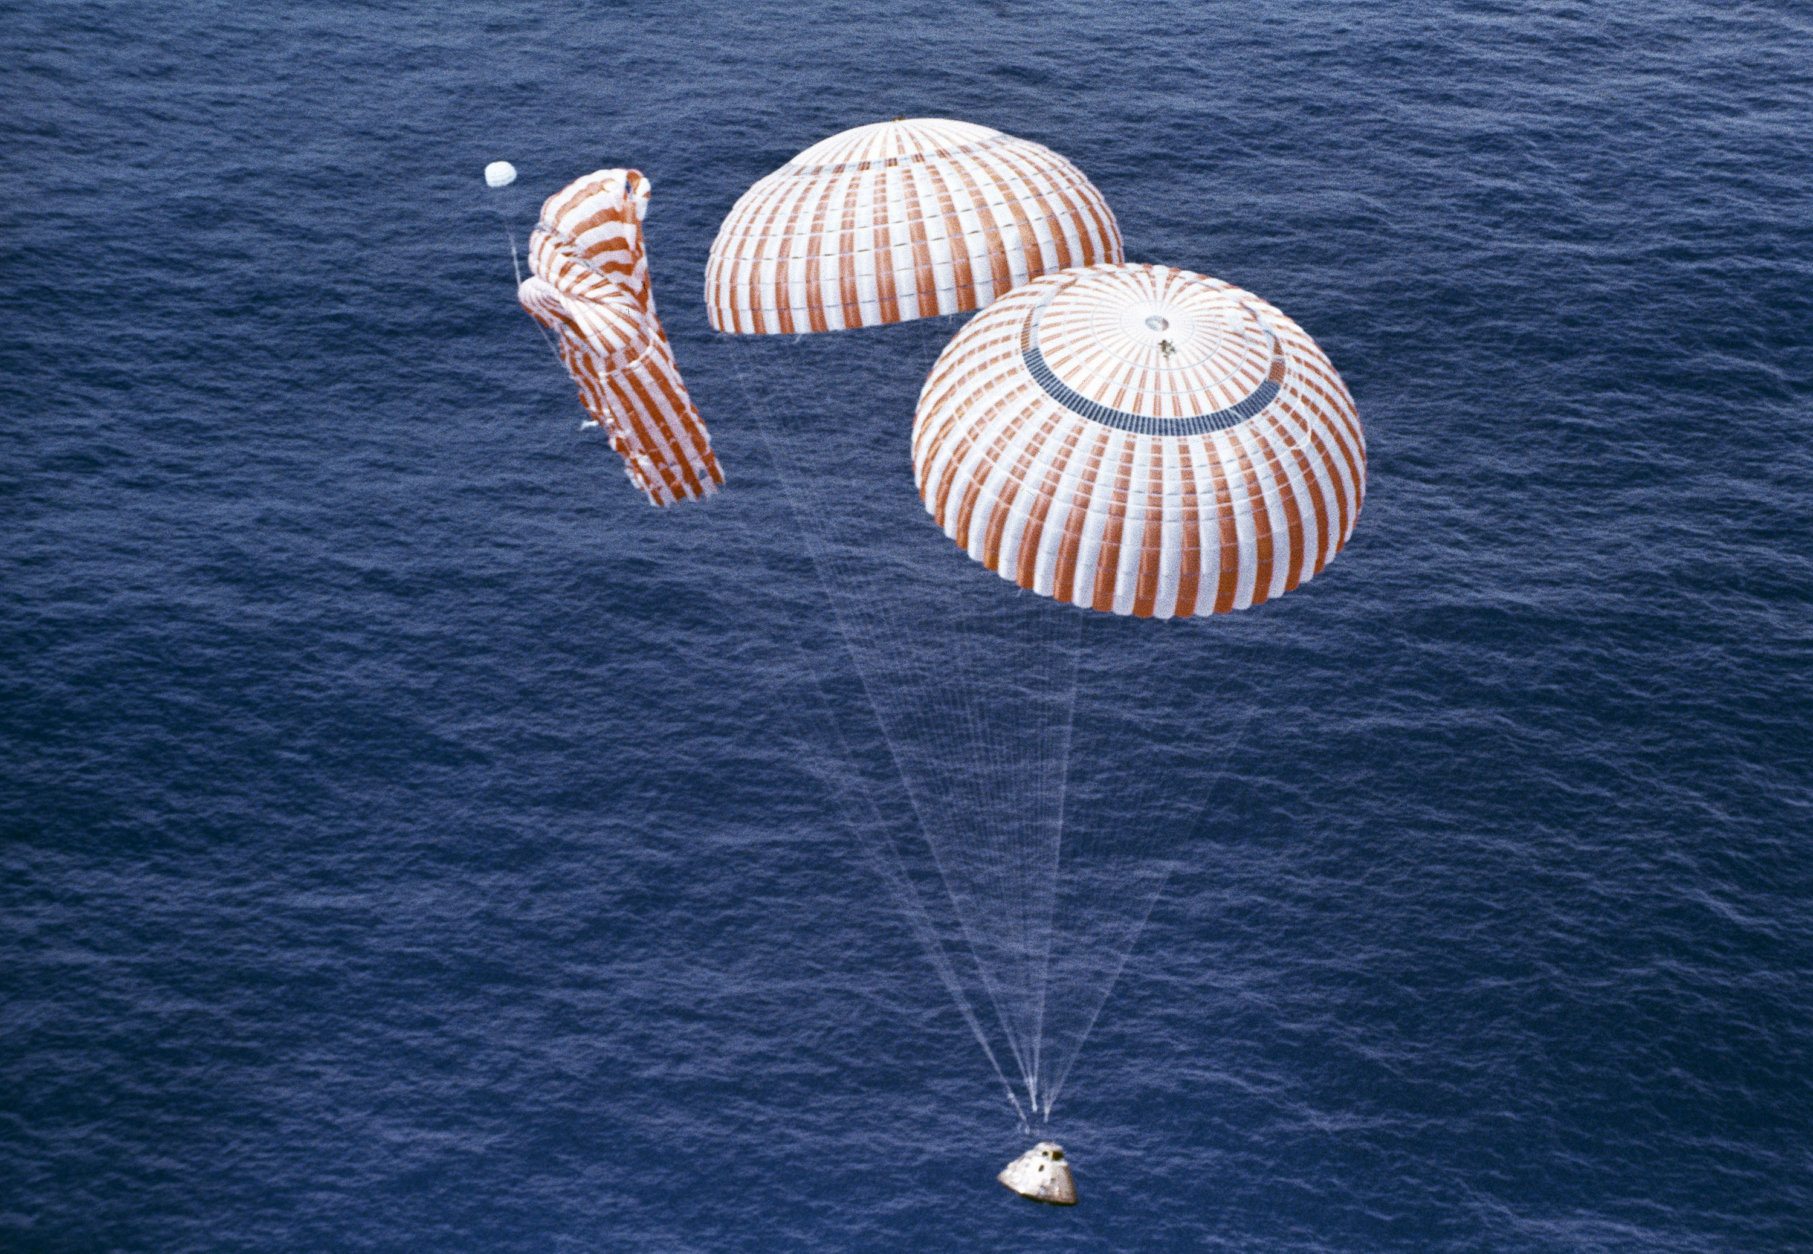 The Apollo 15 spacecraft glided to a safe splashdown in the Pacific Ocean on two of its three parachutes as Astronauts David R. Scott, Alfred M. Worden and James Irwin completed their 12-day lunar mission. The third parachute collapsed, but did not endanger the astronauts, who completed this nations most ambitious lunar mission to date. Splashdown took place at 4:46 p.m. EDT; 333 miles north of Hawaii, August 7, 1972, and 295 hours after the astronauts were launched from the Kennedy Space Center. (AP Photo)